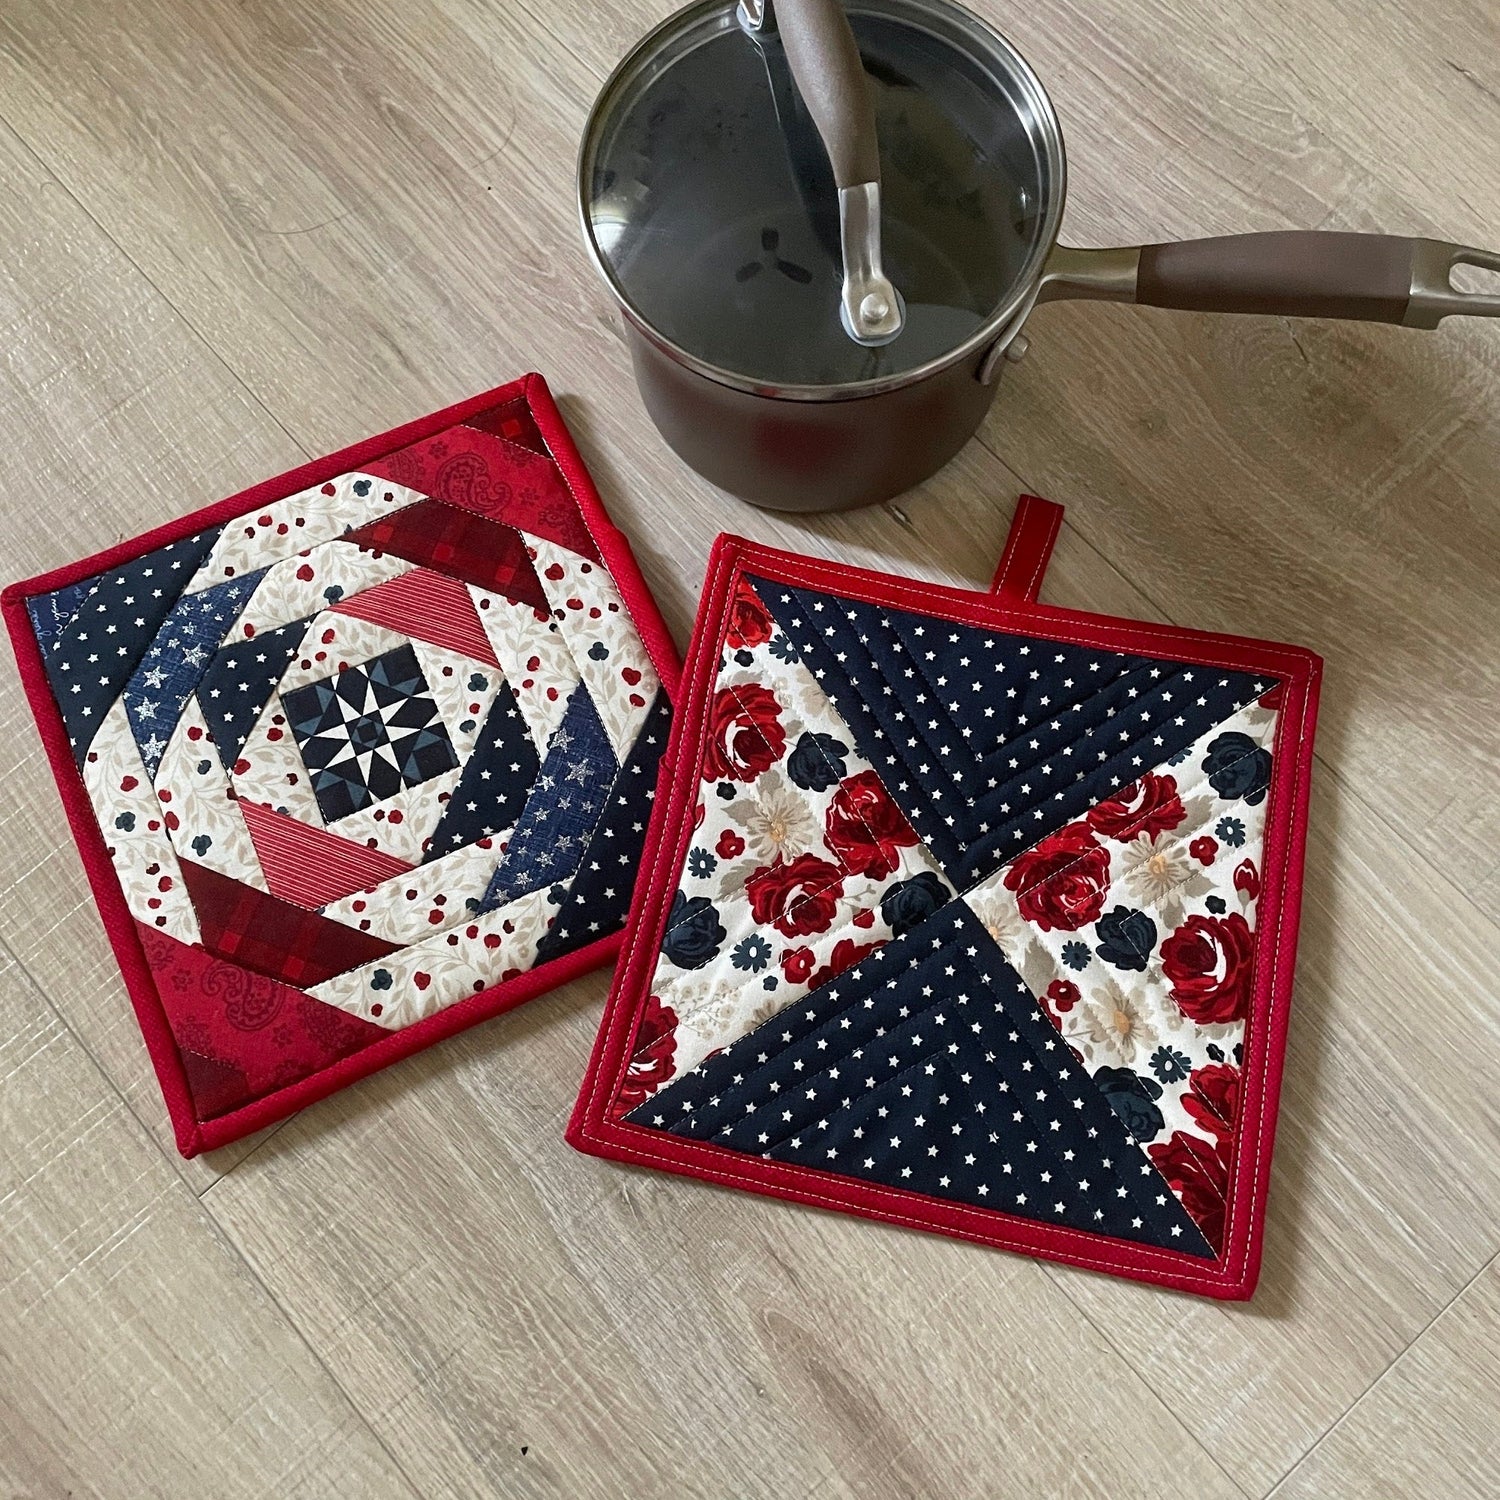 Set of two quilted potholders in red, white, and blue.